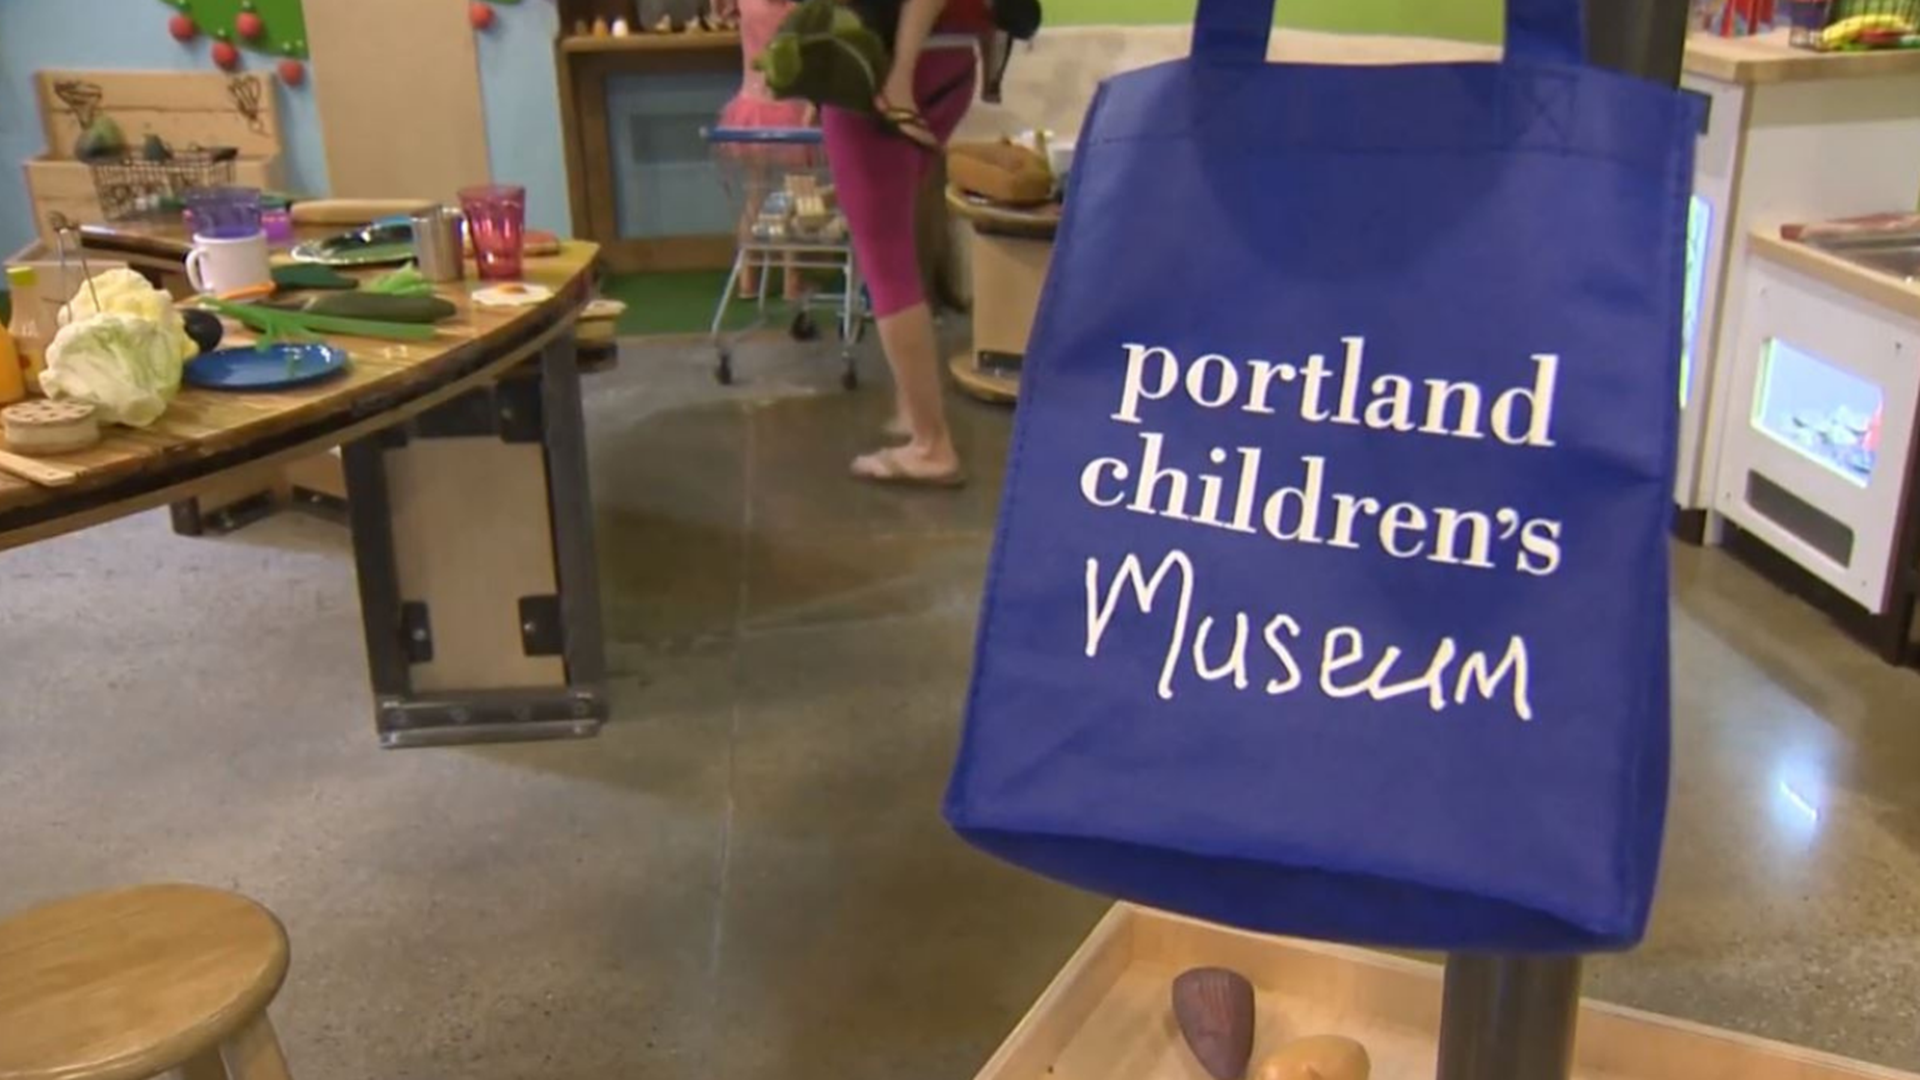 Parents are confused and concerned over the closing of the Portland Children's Museum which has been an institution in the city for 75 years.